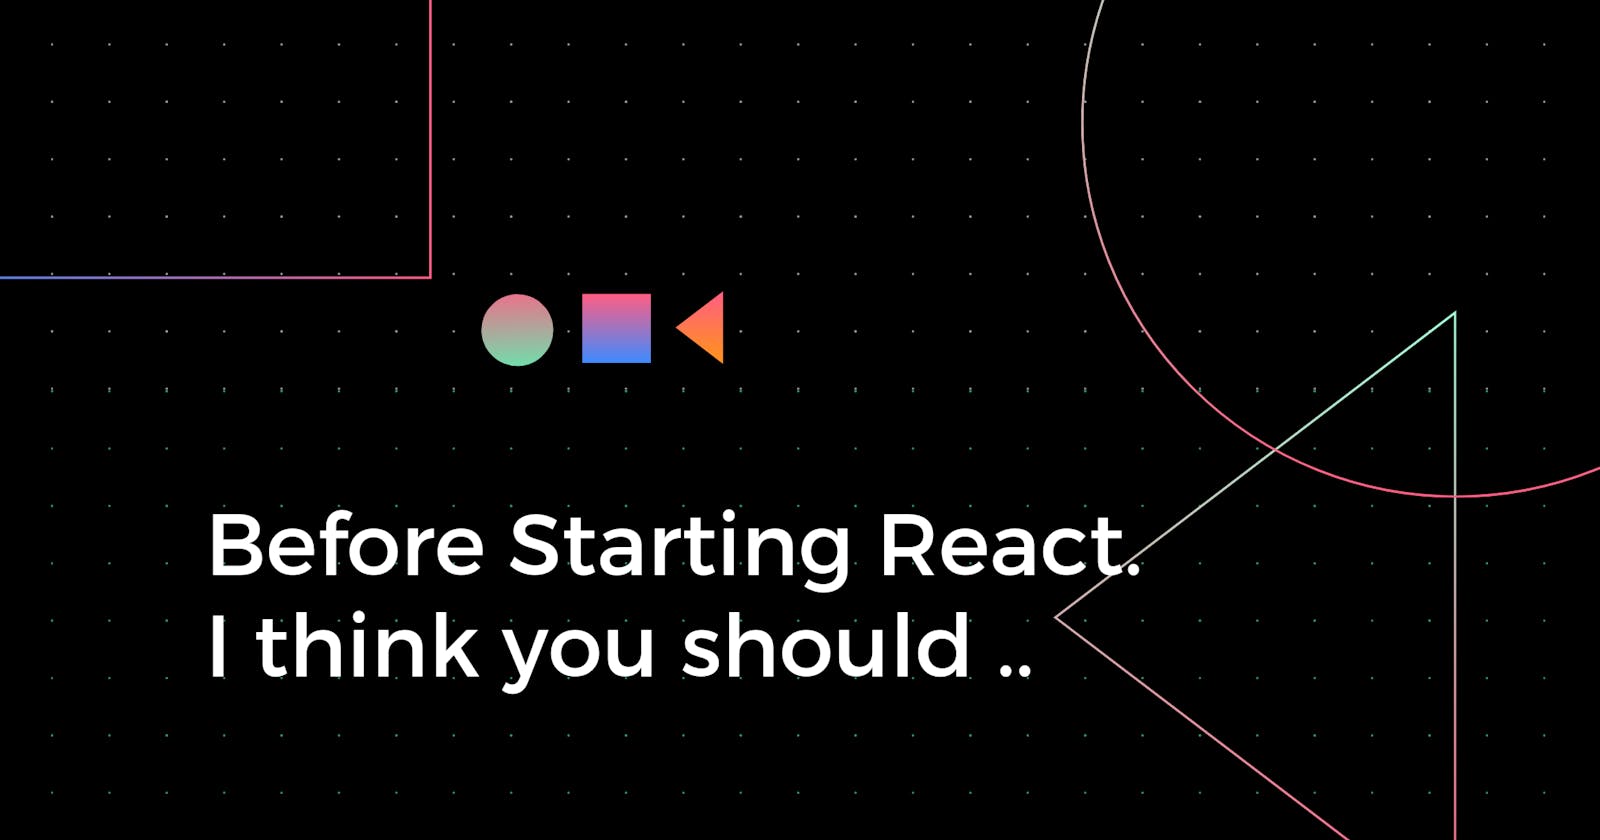 Before starting React, I think you should ...